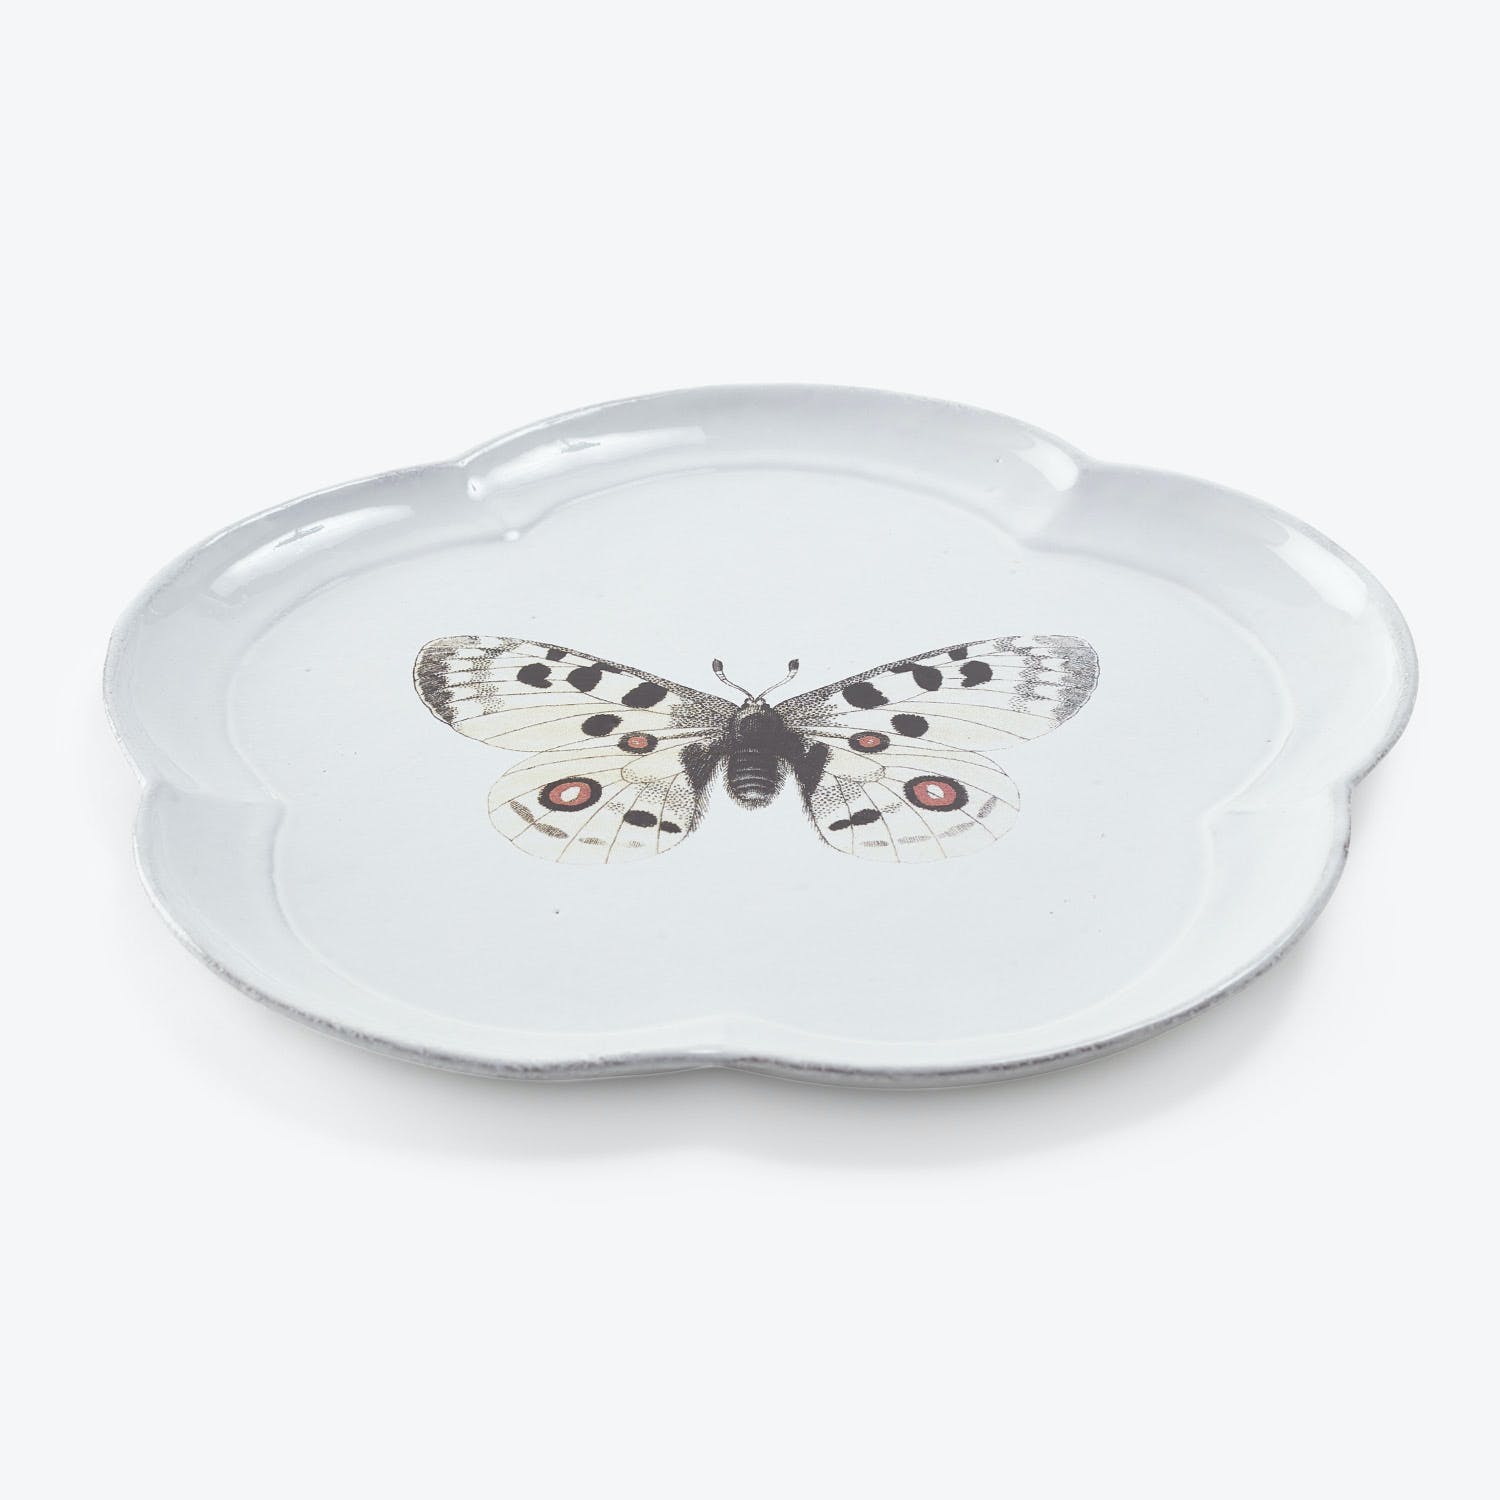 Elegant ceramic plate features a stunning butterfly motif in detailed design.